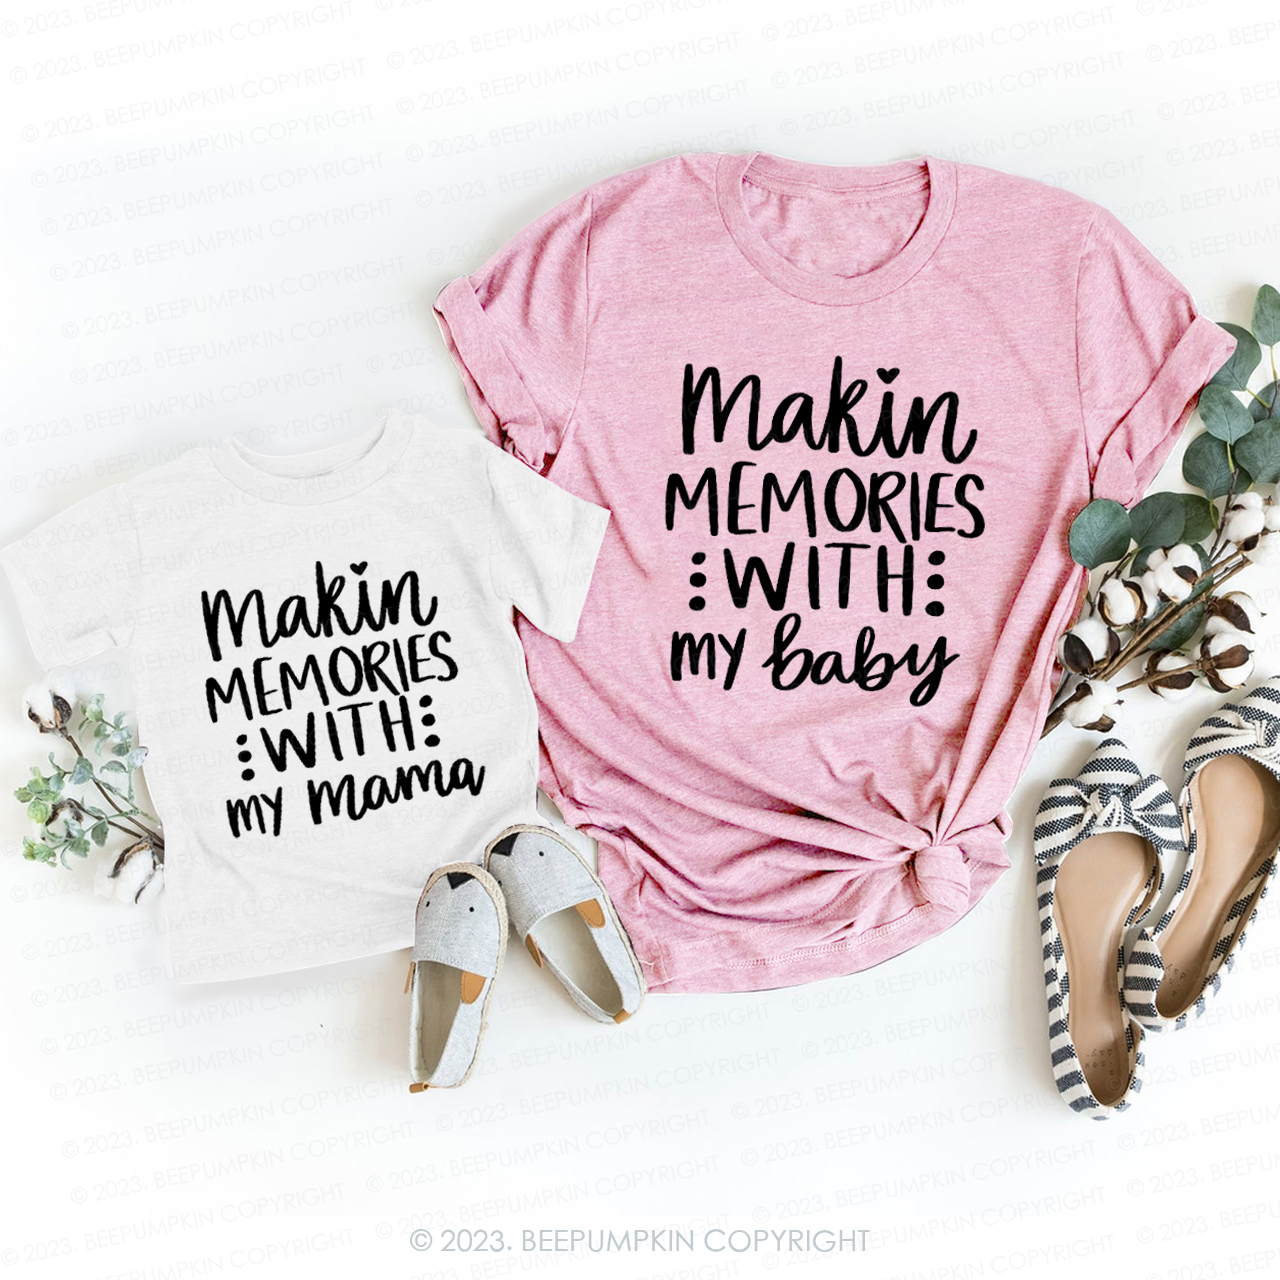 Making Memories With My Baby T-Shirts For Mom&Me